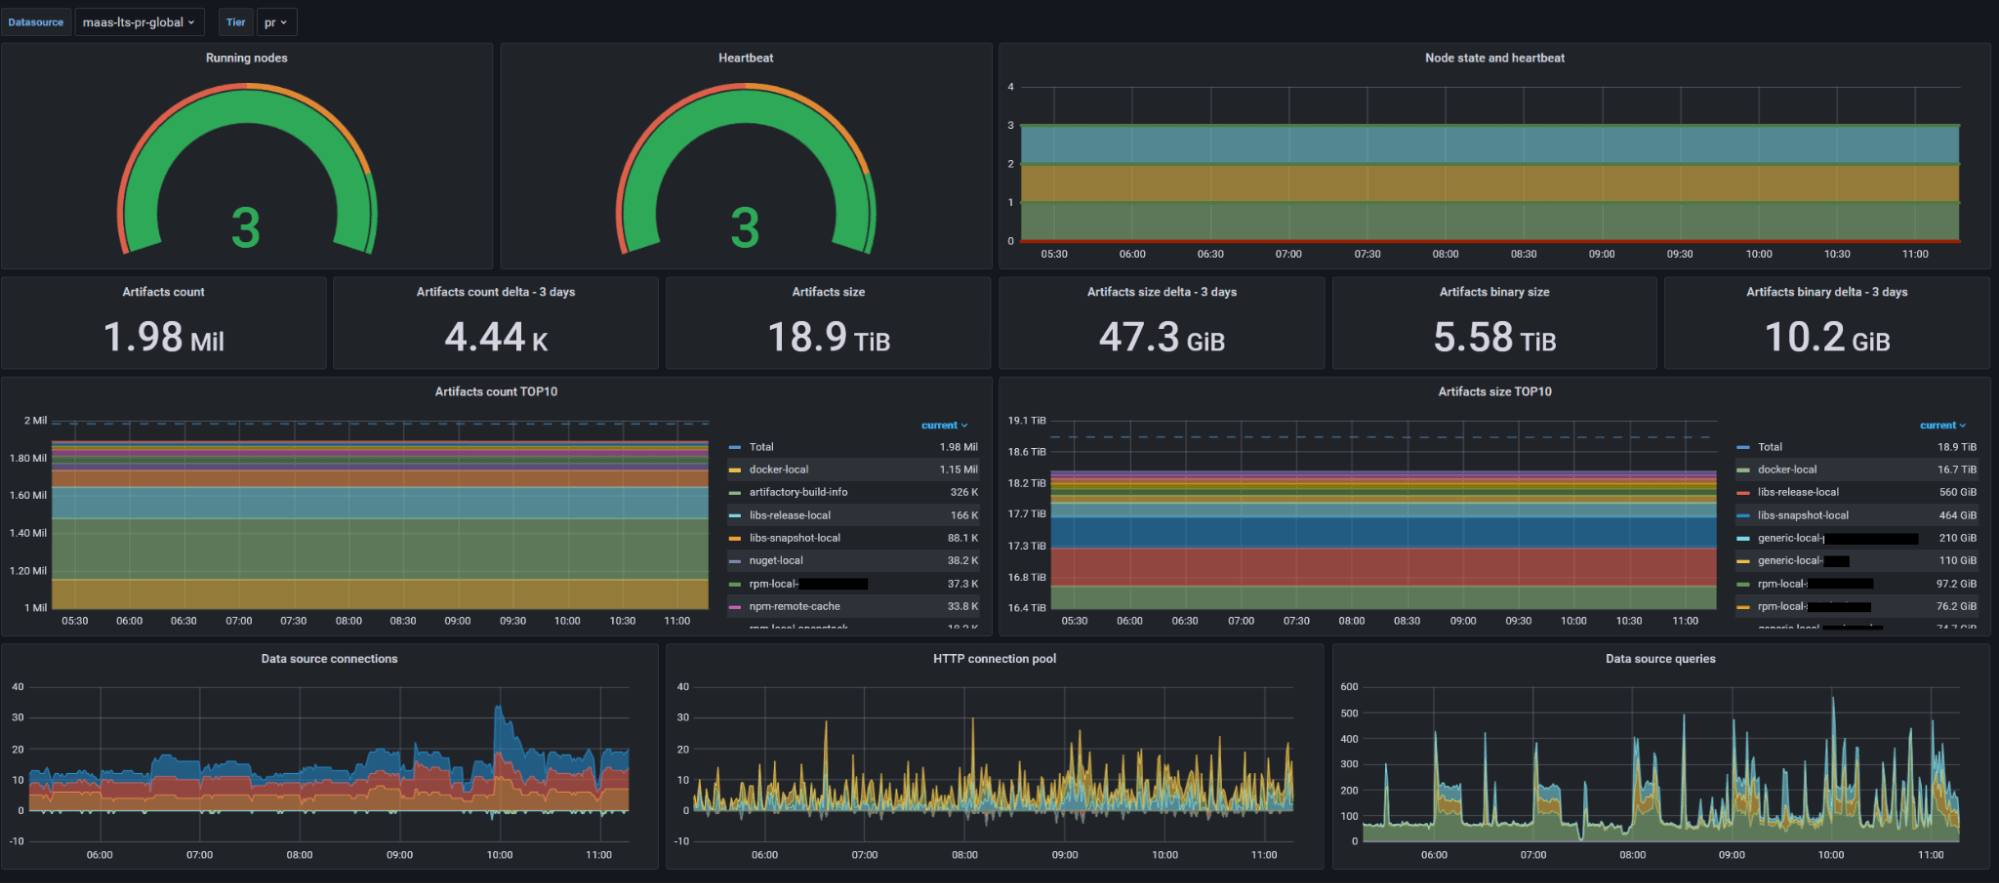 A Grafana dashboard displays time series data collected by Adform. 